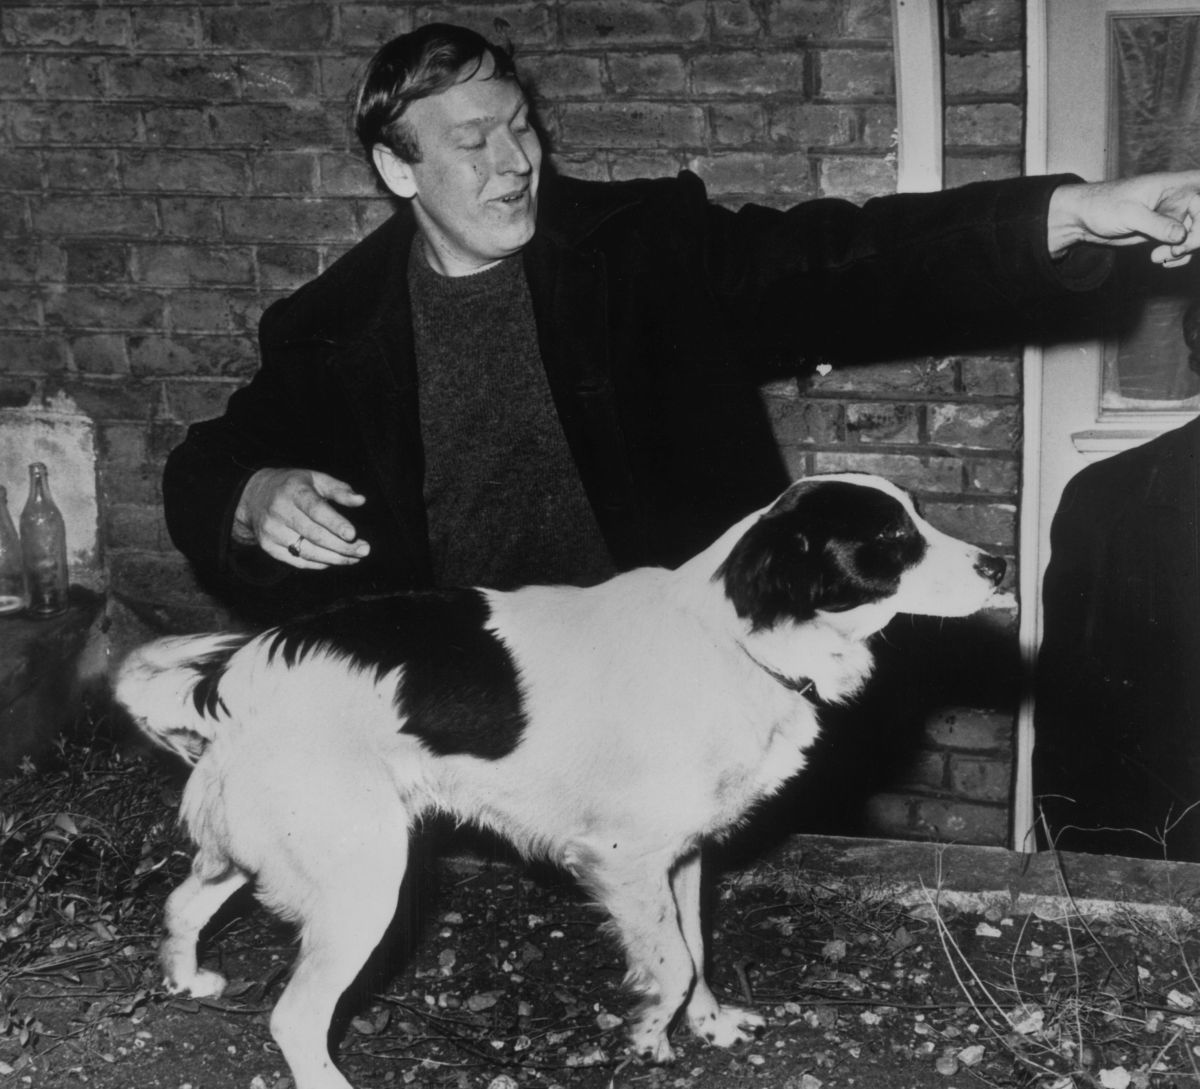 The tender story of Pickles, the puppy that rescued the World Cup in England 1966